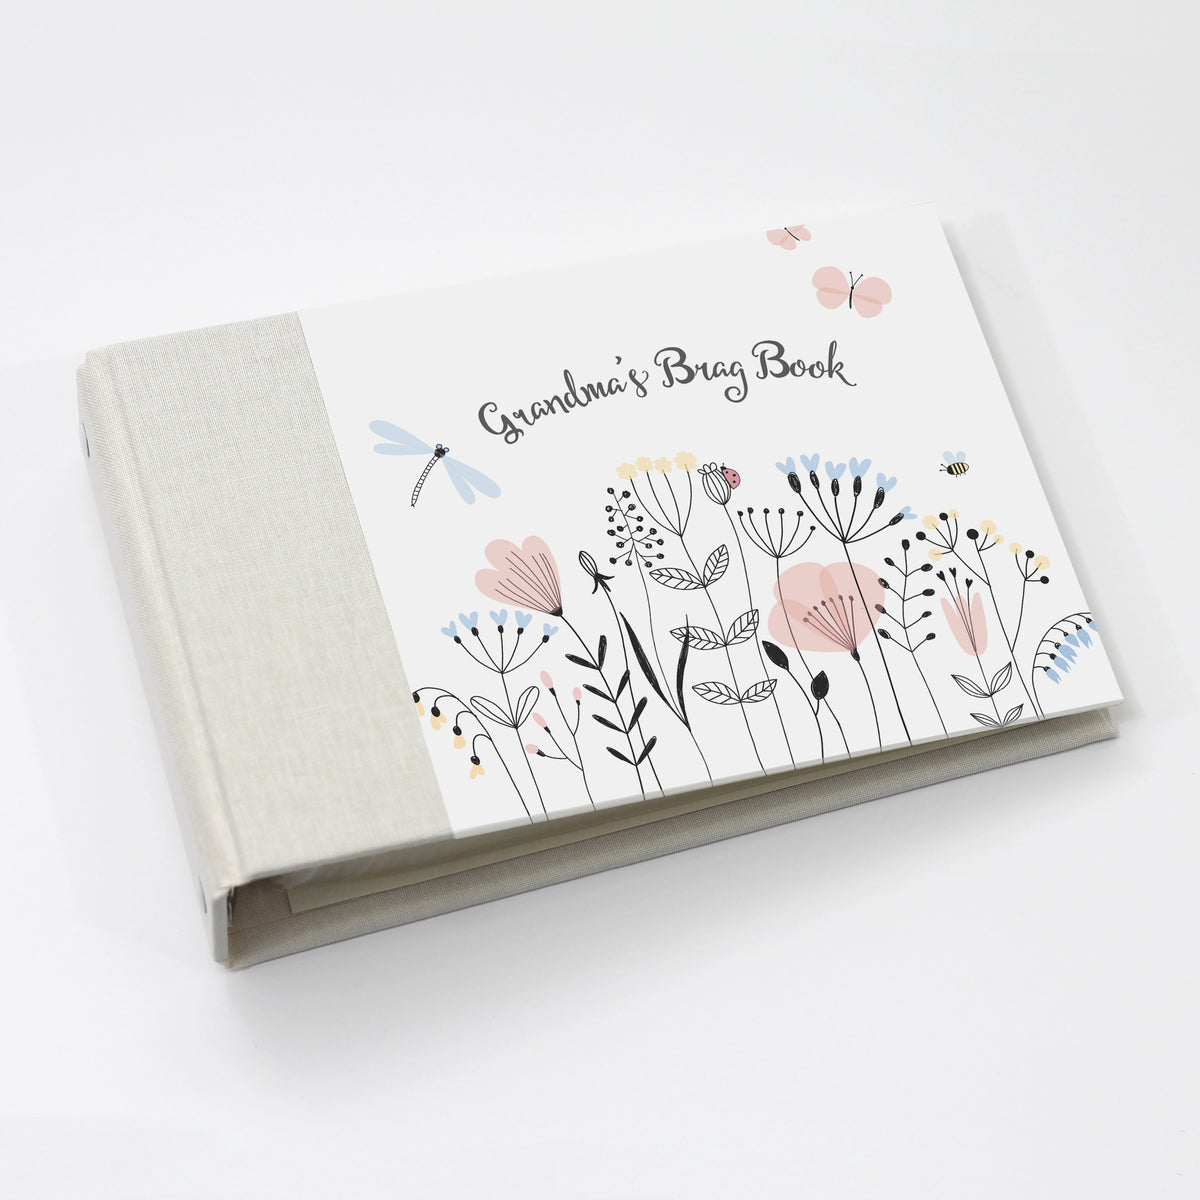 Grandma&#39;s Brag Book | Printed Cover: Ladybug Picnic | Available Personalized